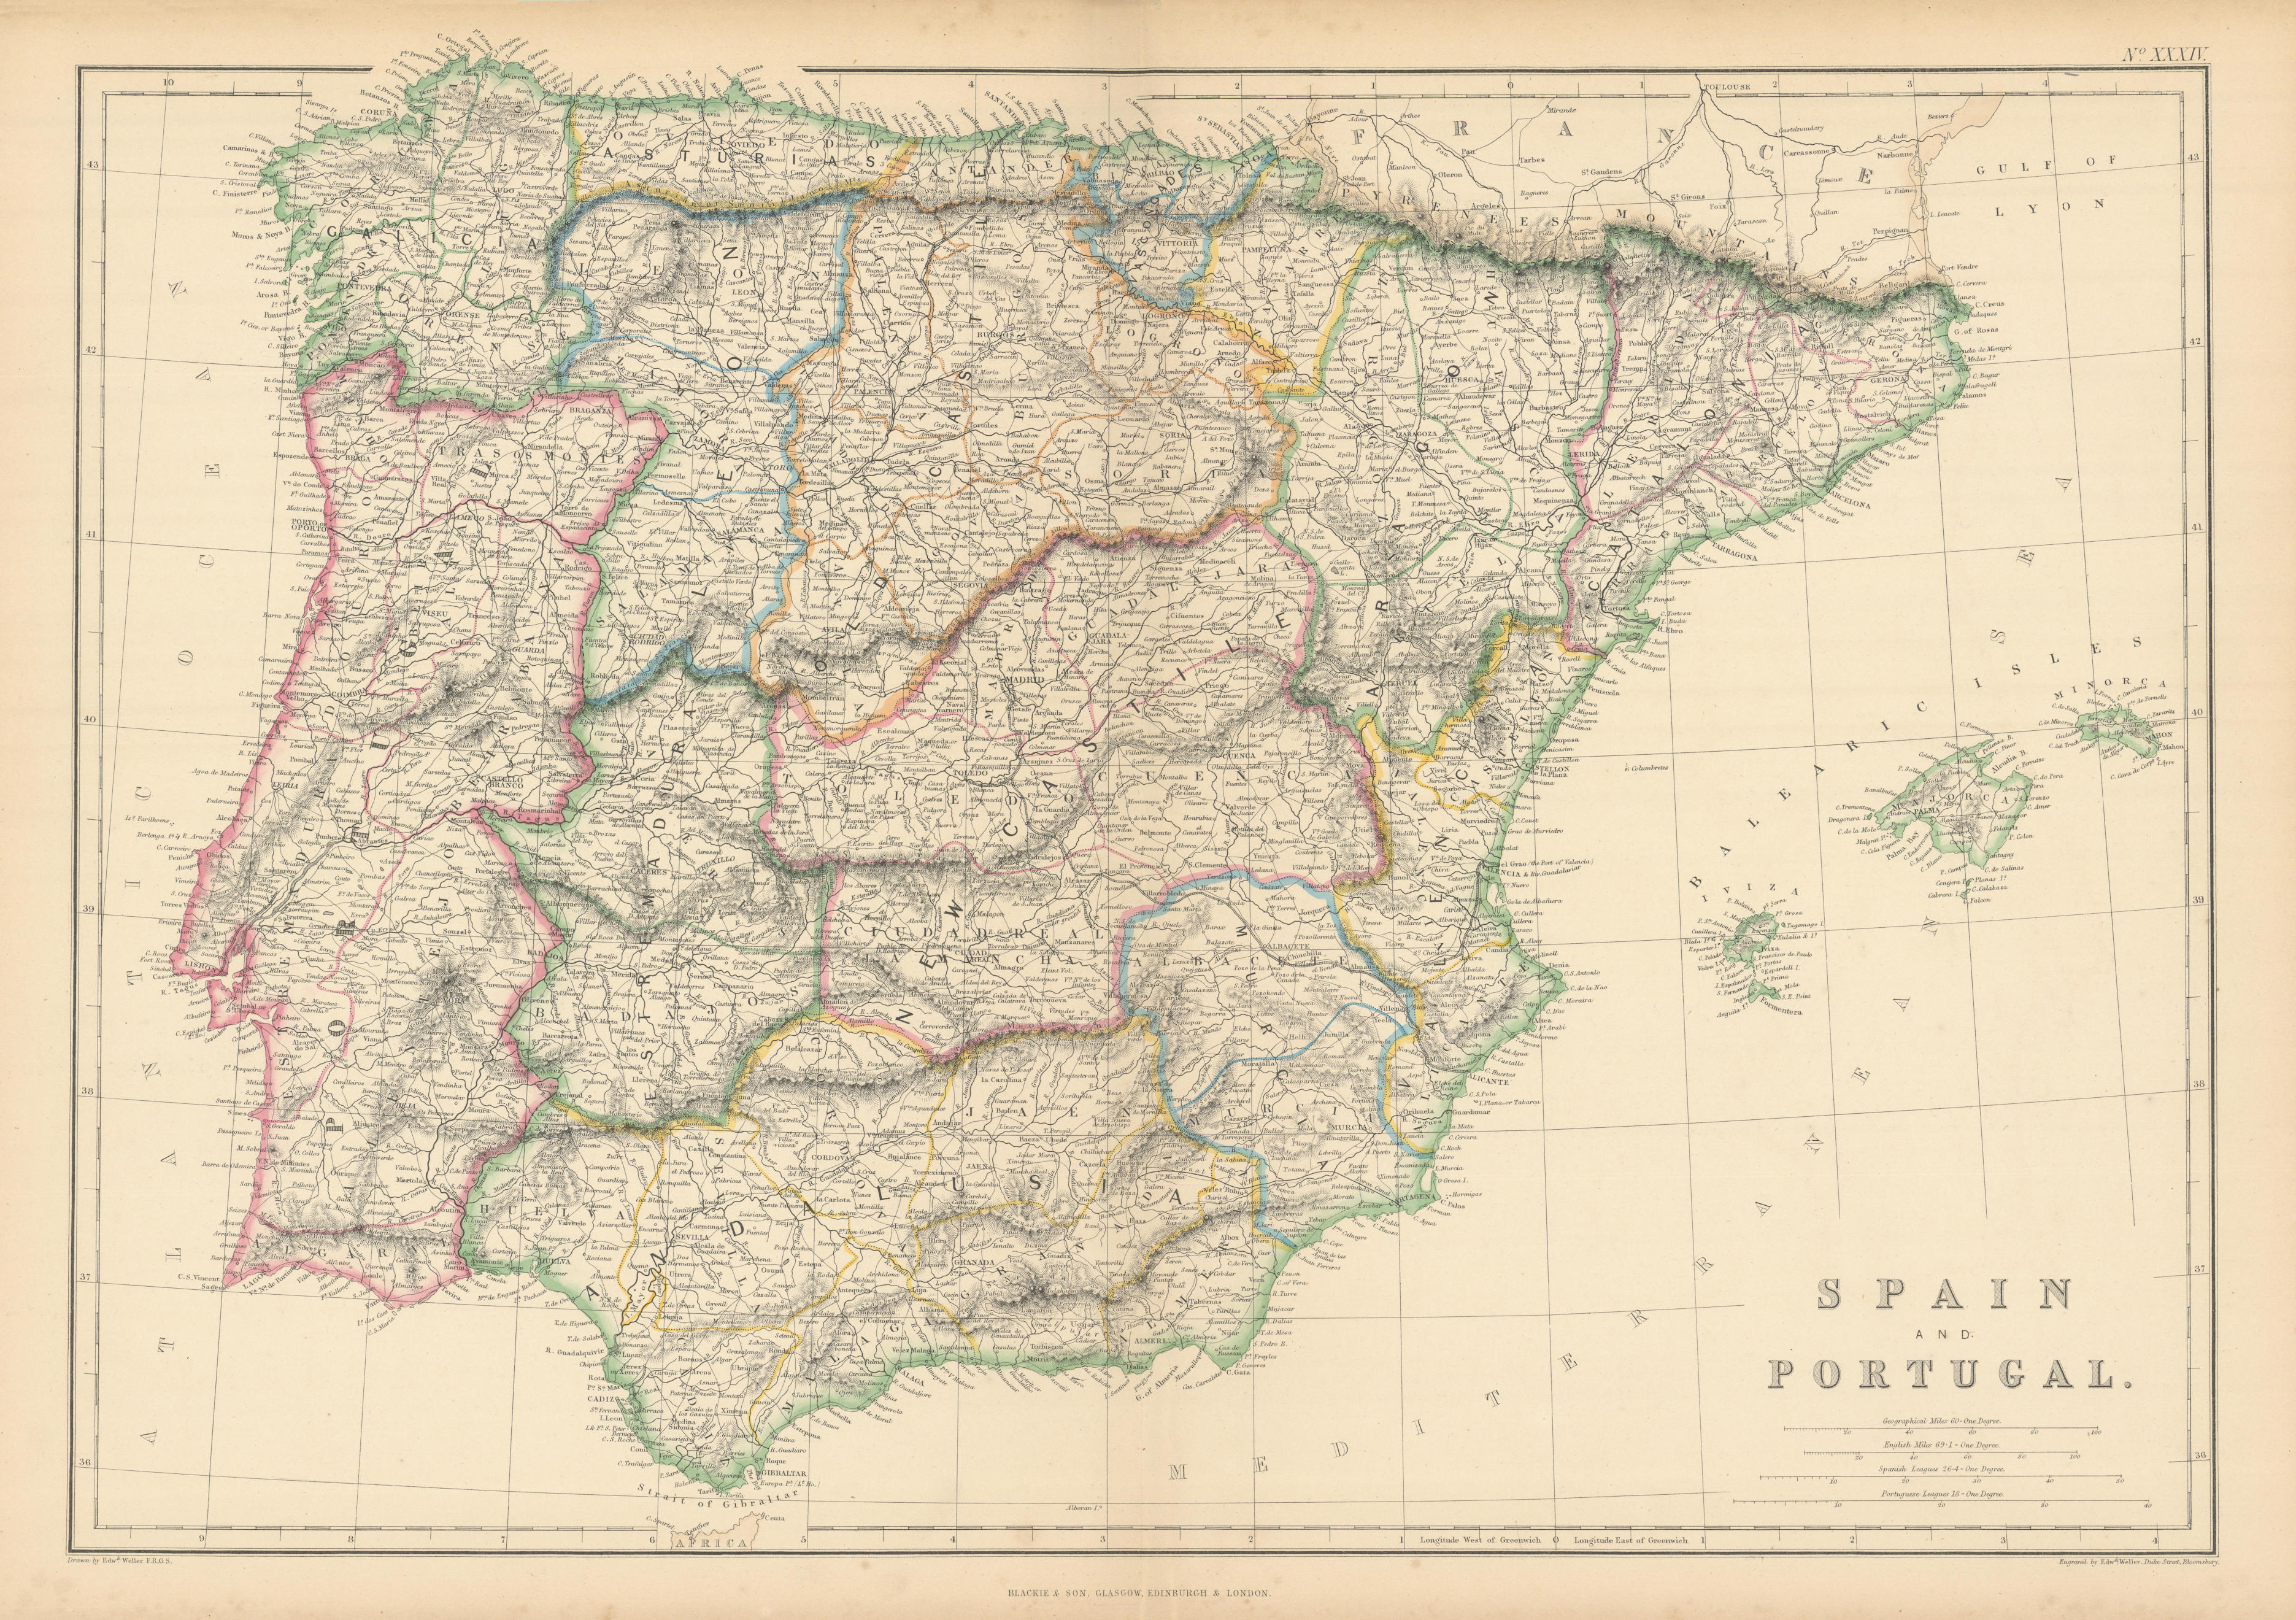 Associate Product Spain and Portugal by Edward Weller. Iberia 1859 old antique map plan chart